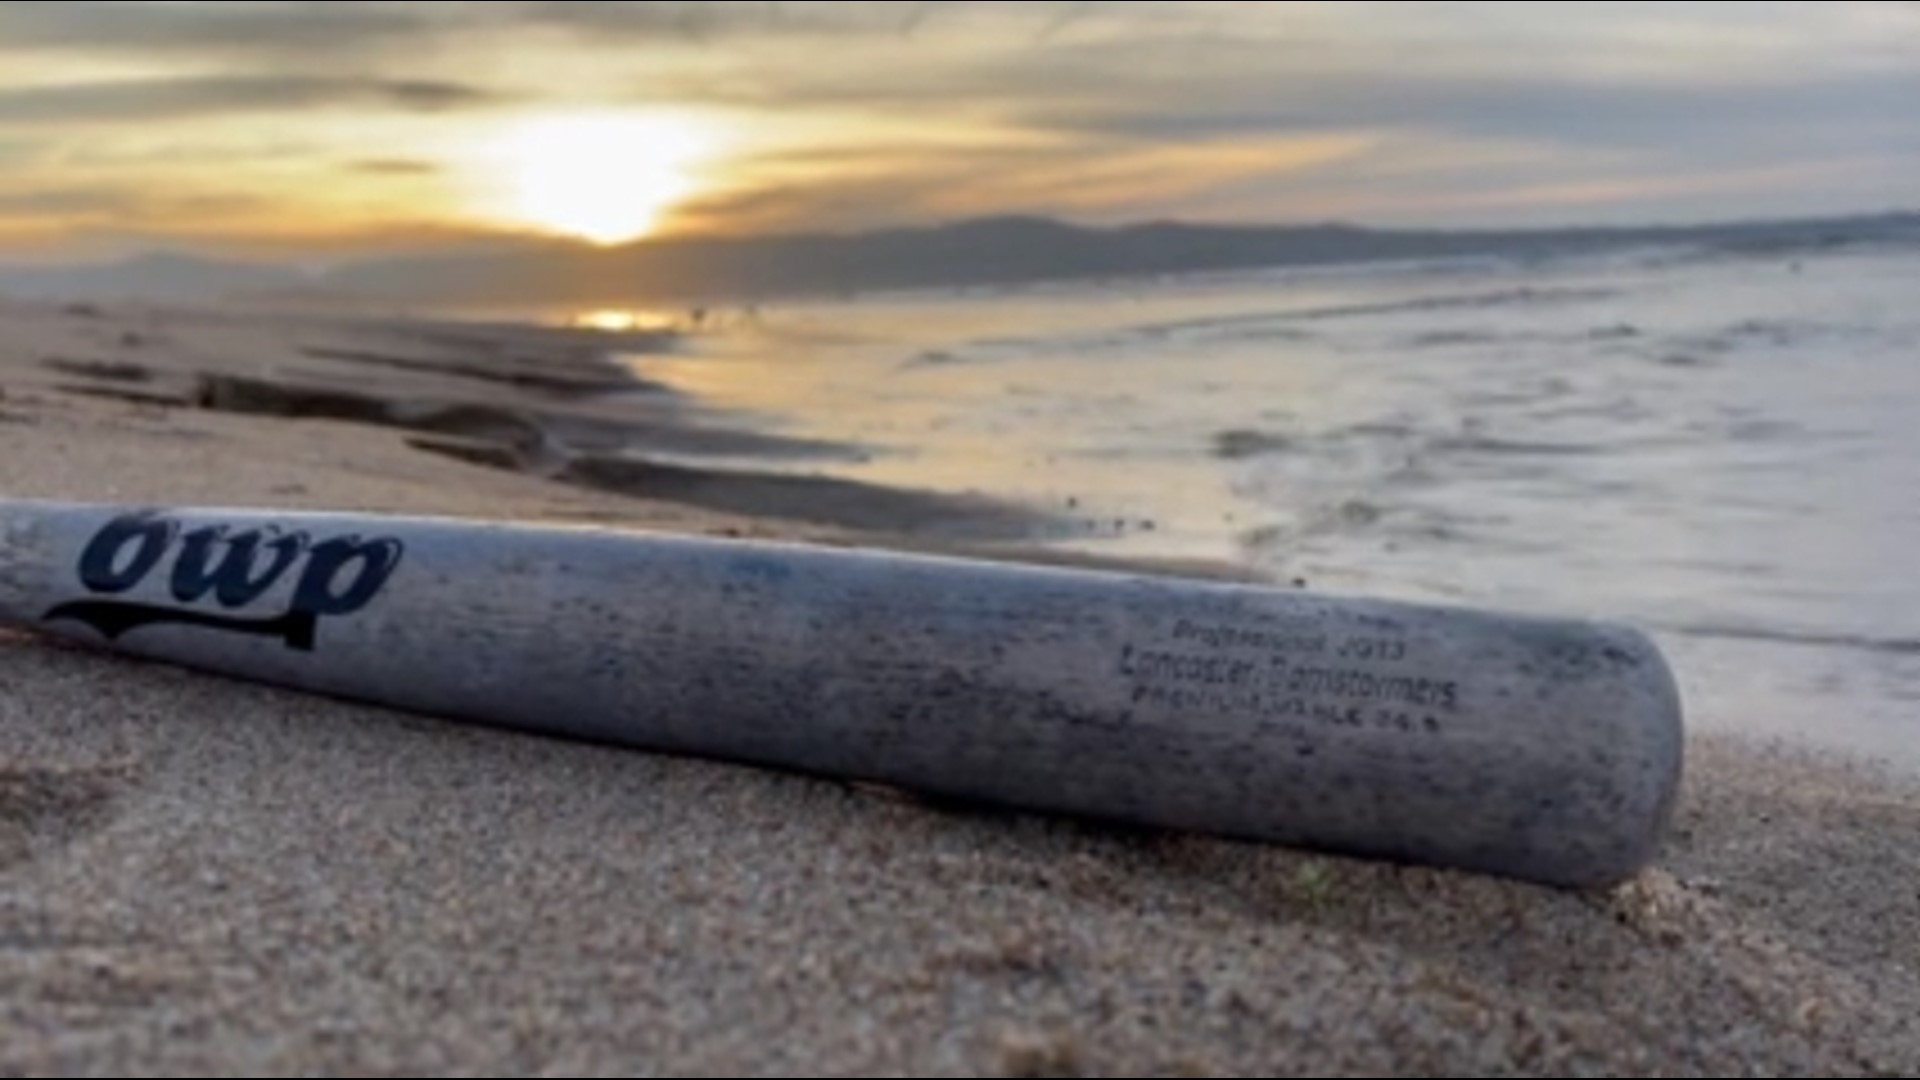 It remains a mystery how a Lancaster Barnstormers bat was found on a California beach.